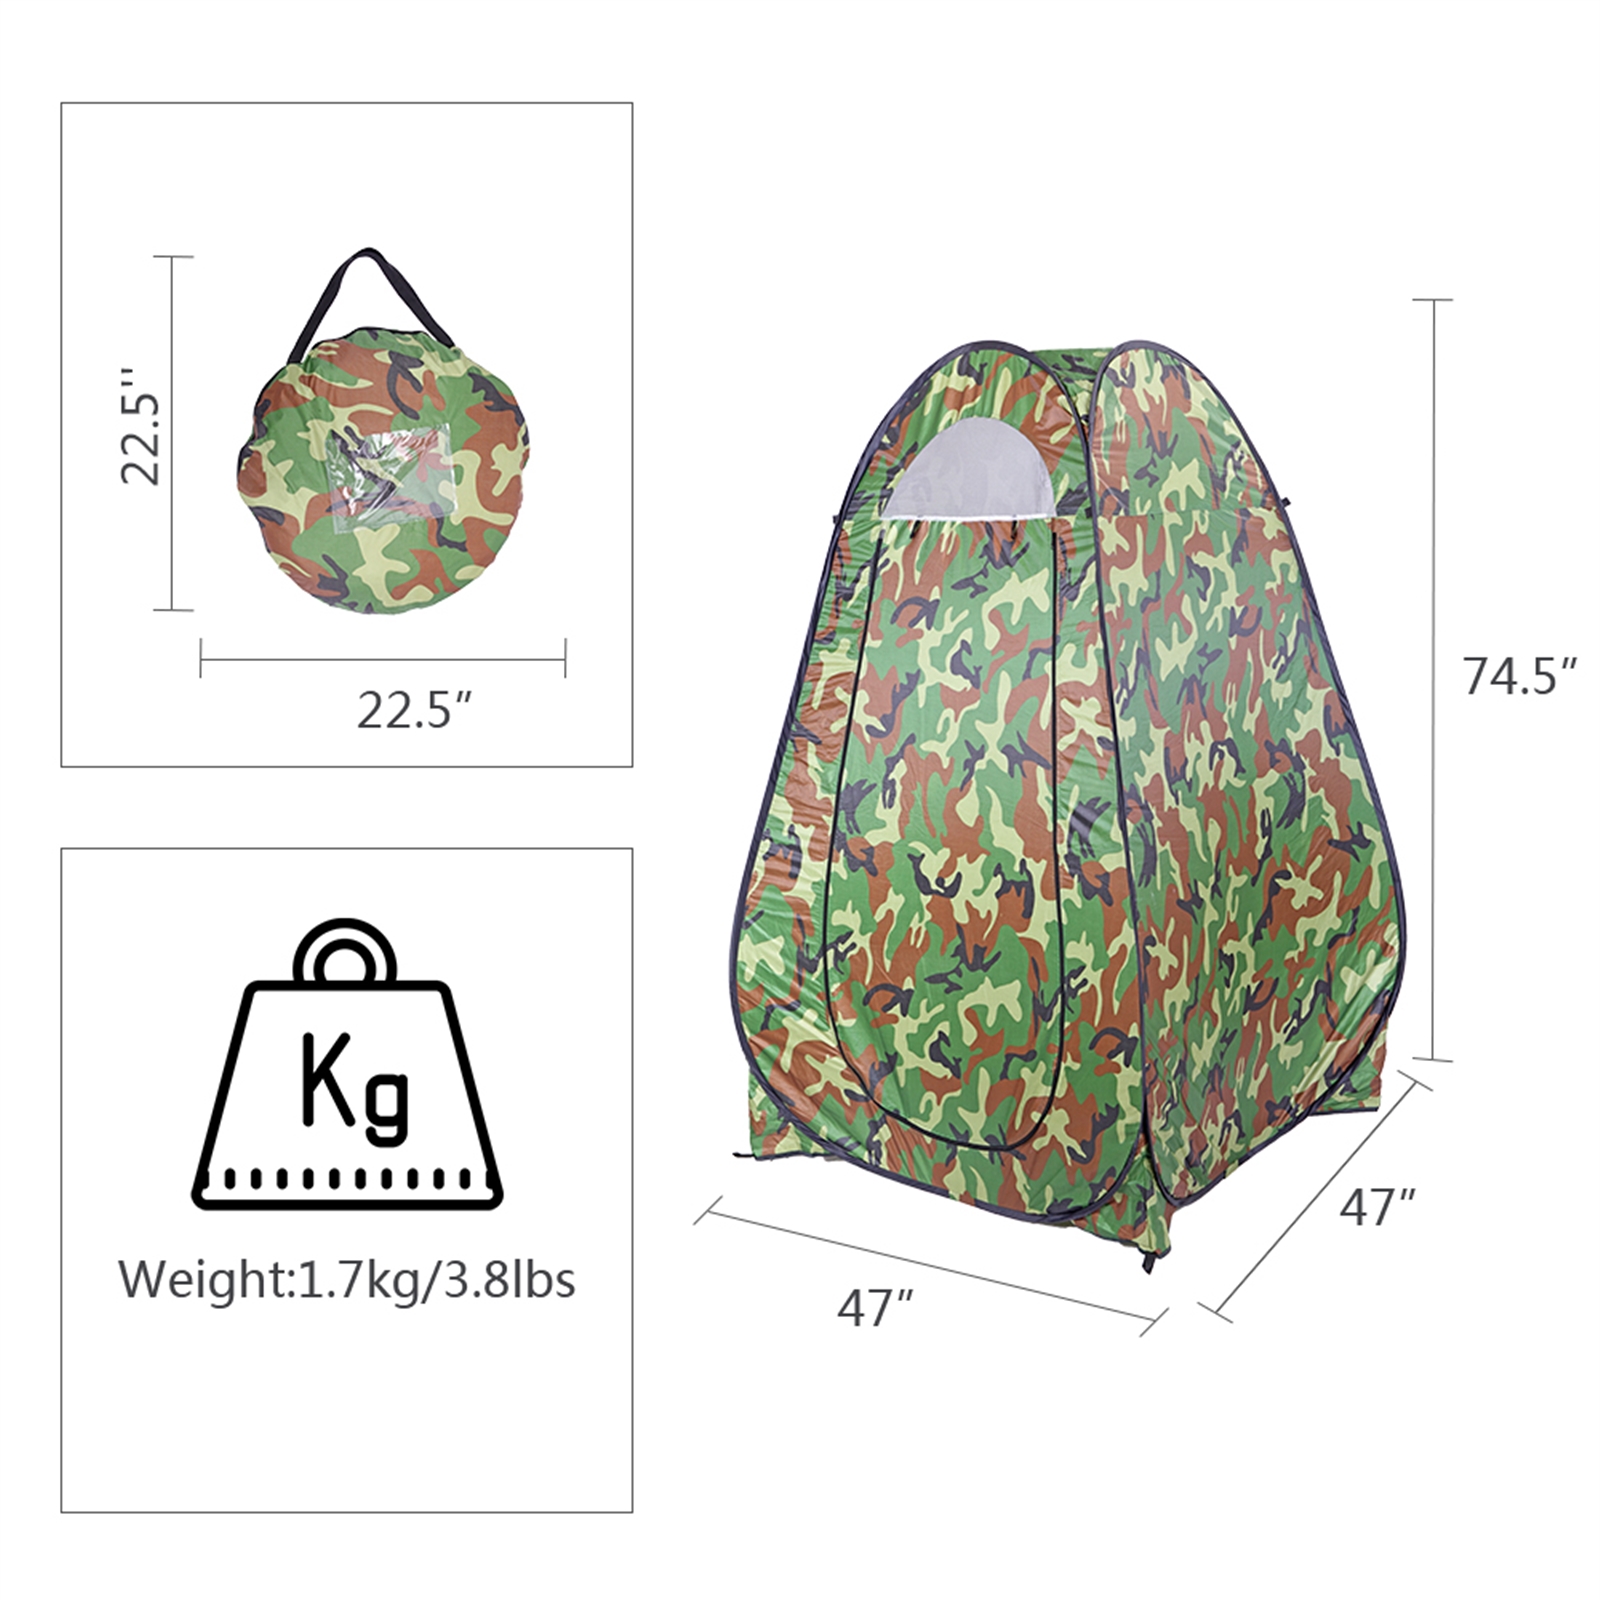 Portable Privacy Tent, Pop-Up Dressing Room Camping Shower Tent for Camping Picnic, Camouflage - image 2 of 7